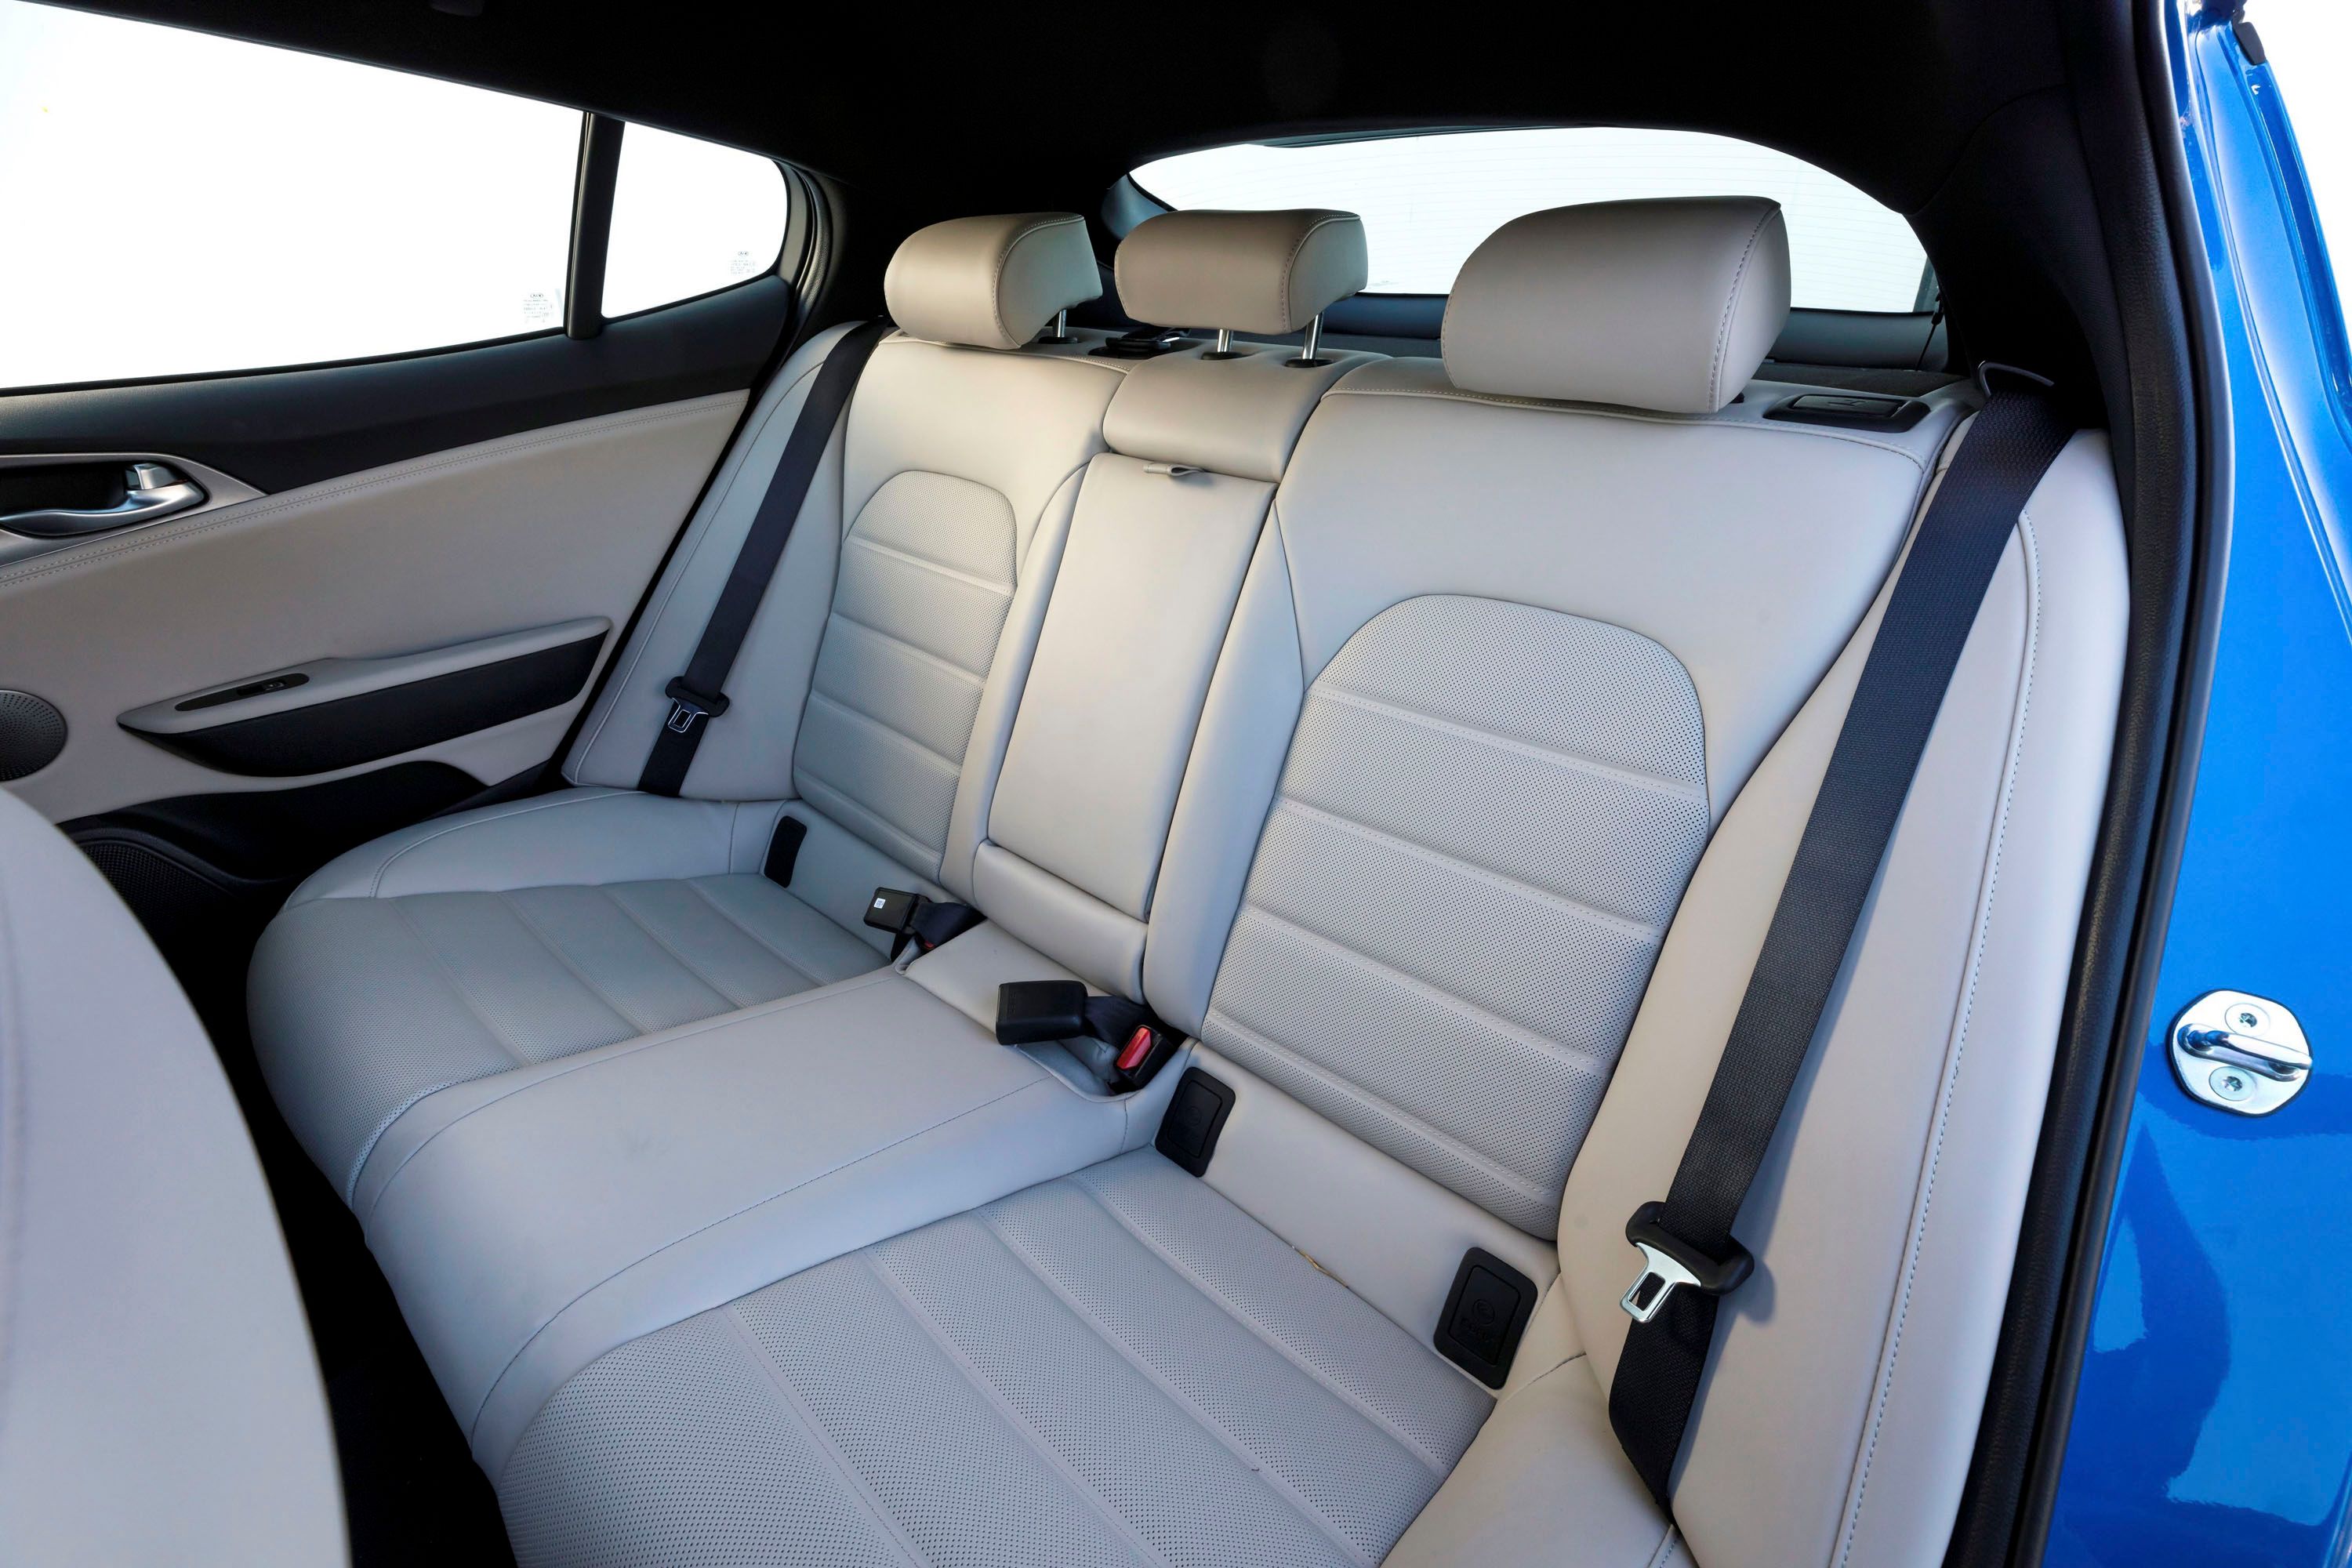 Spacious rear seats unparalleled by BMW or Audi